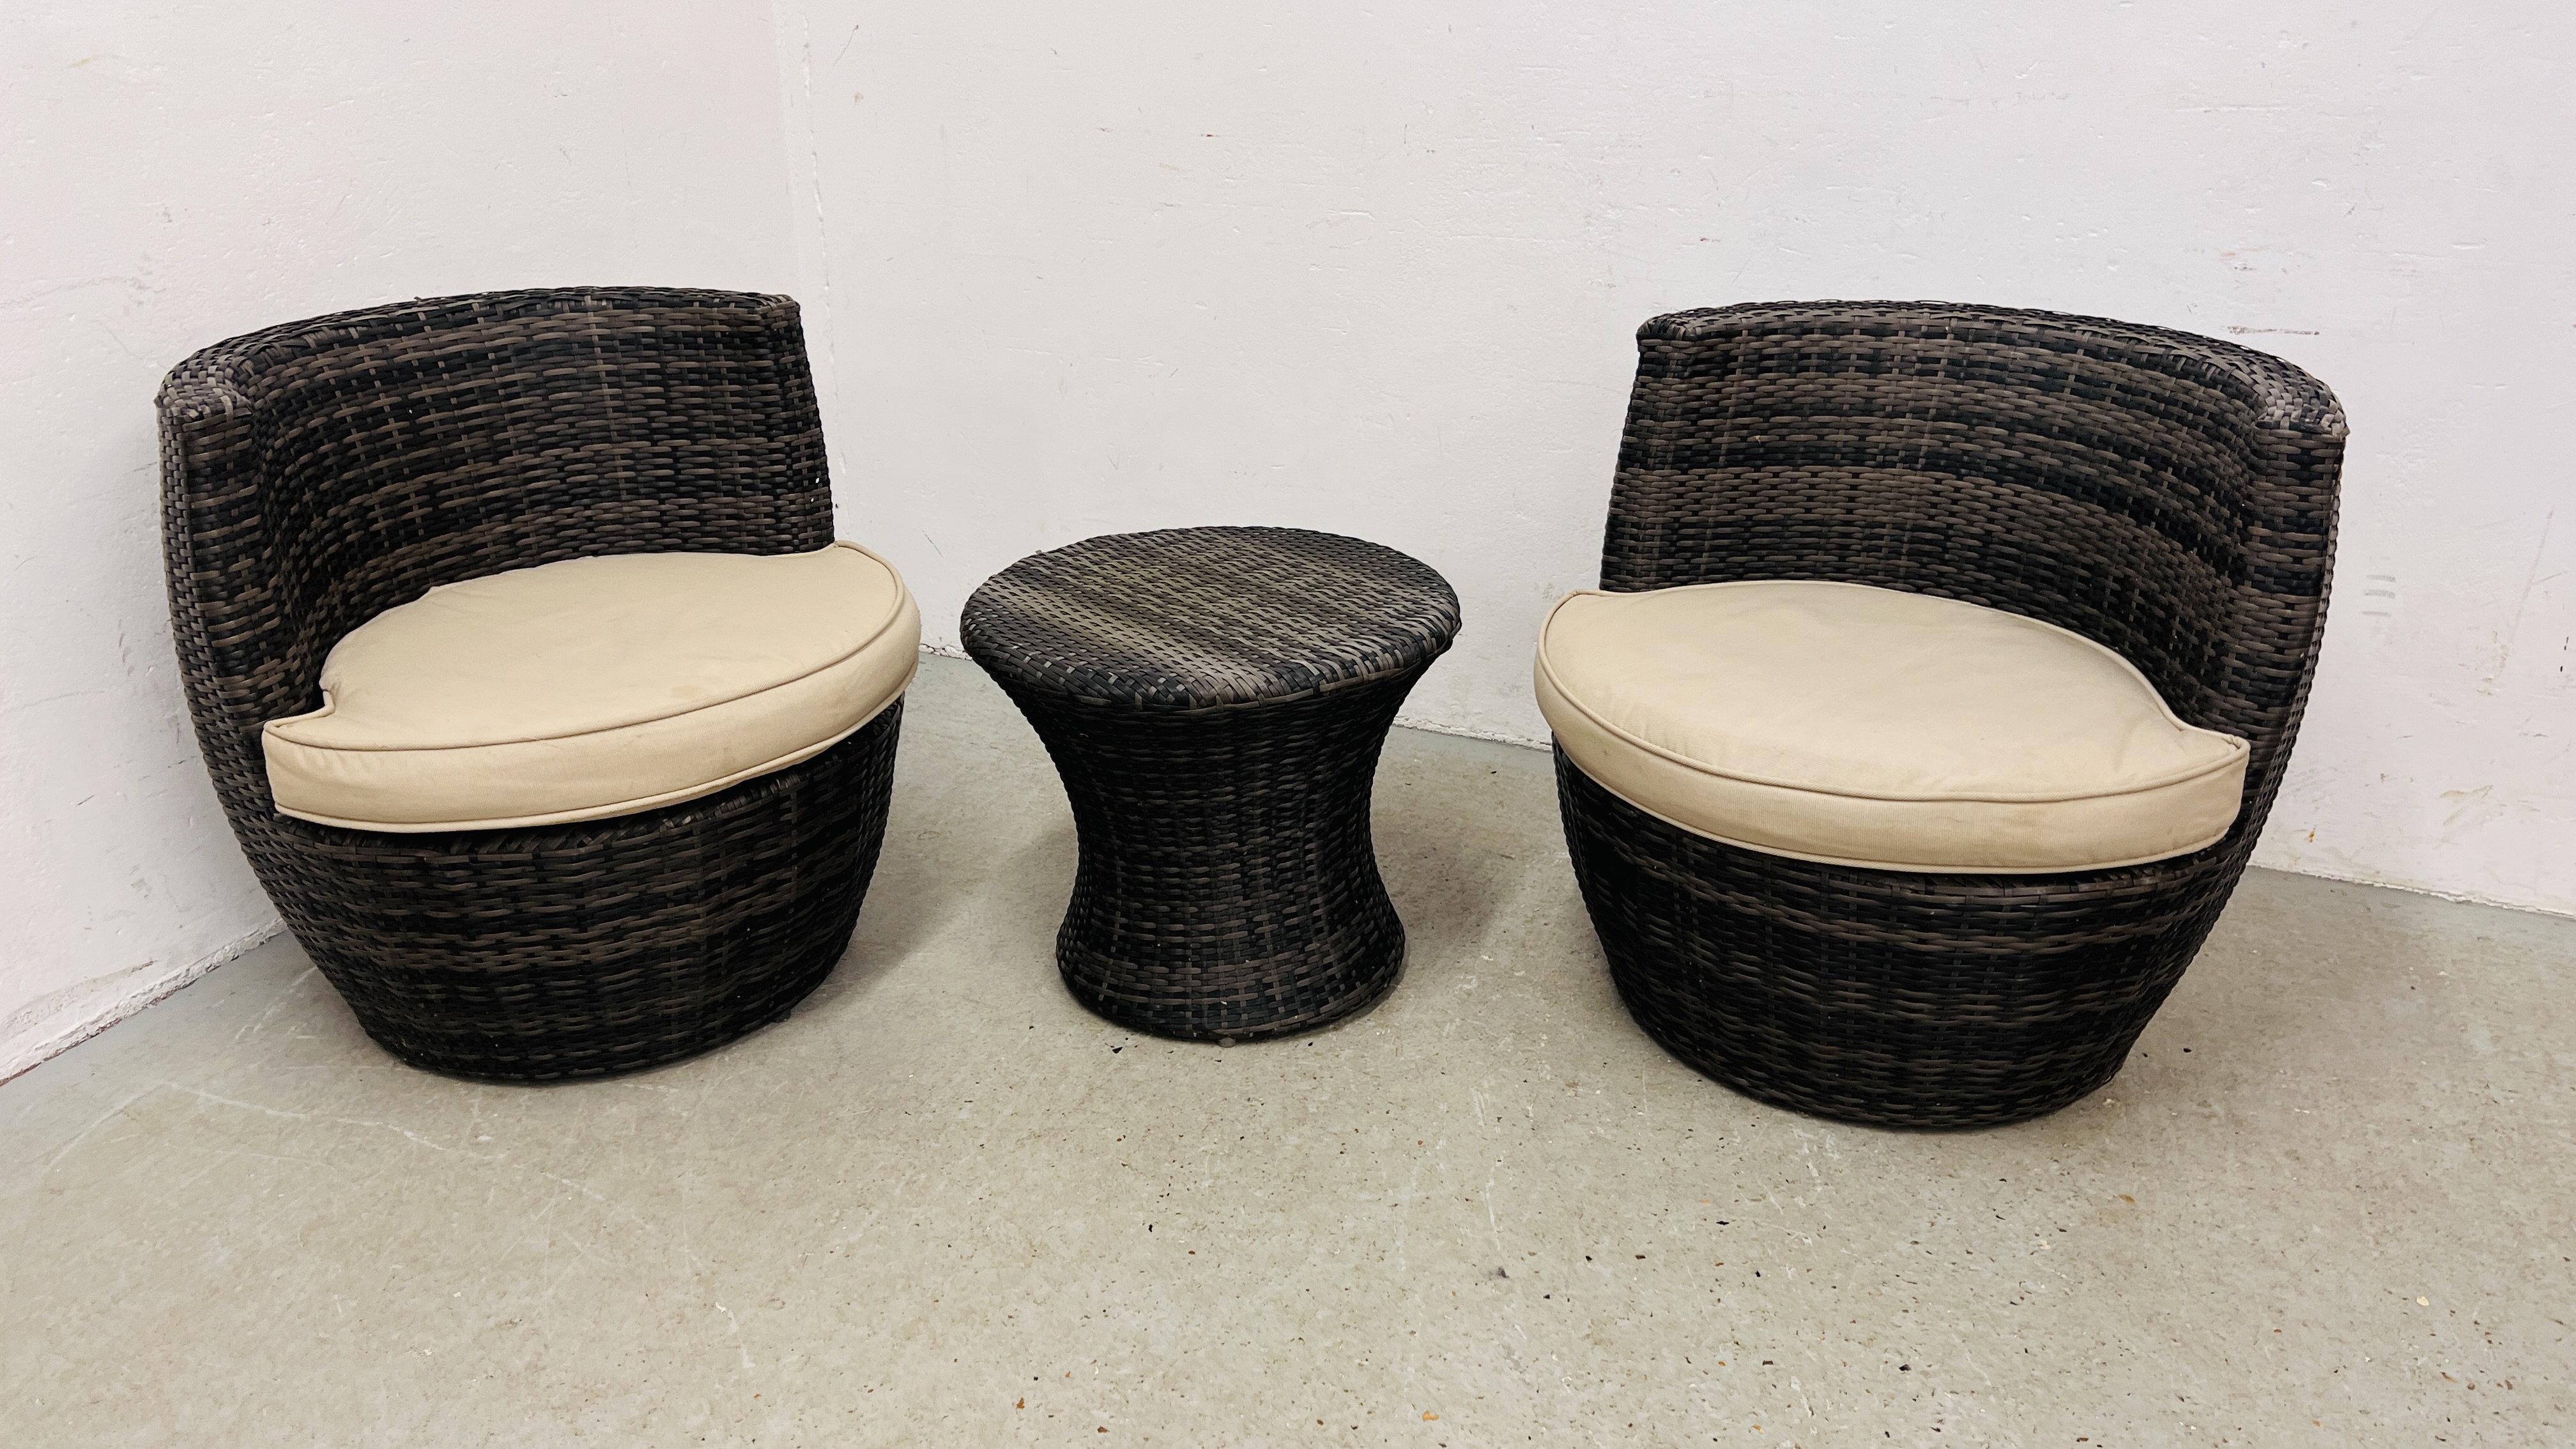 A PAIR OF MODERN GARDEN WOVEN BARREL CHAIRS ALONG WITH A MATCHING CIRCULAR TABLE.